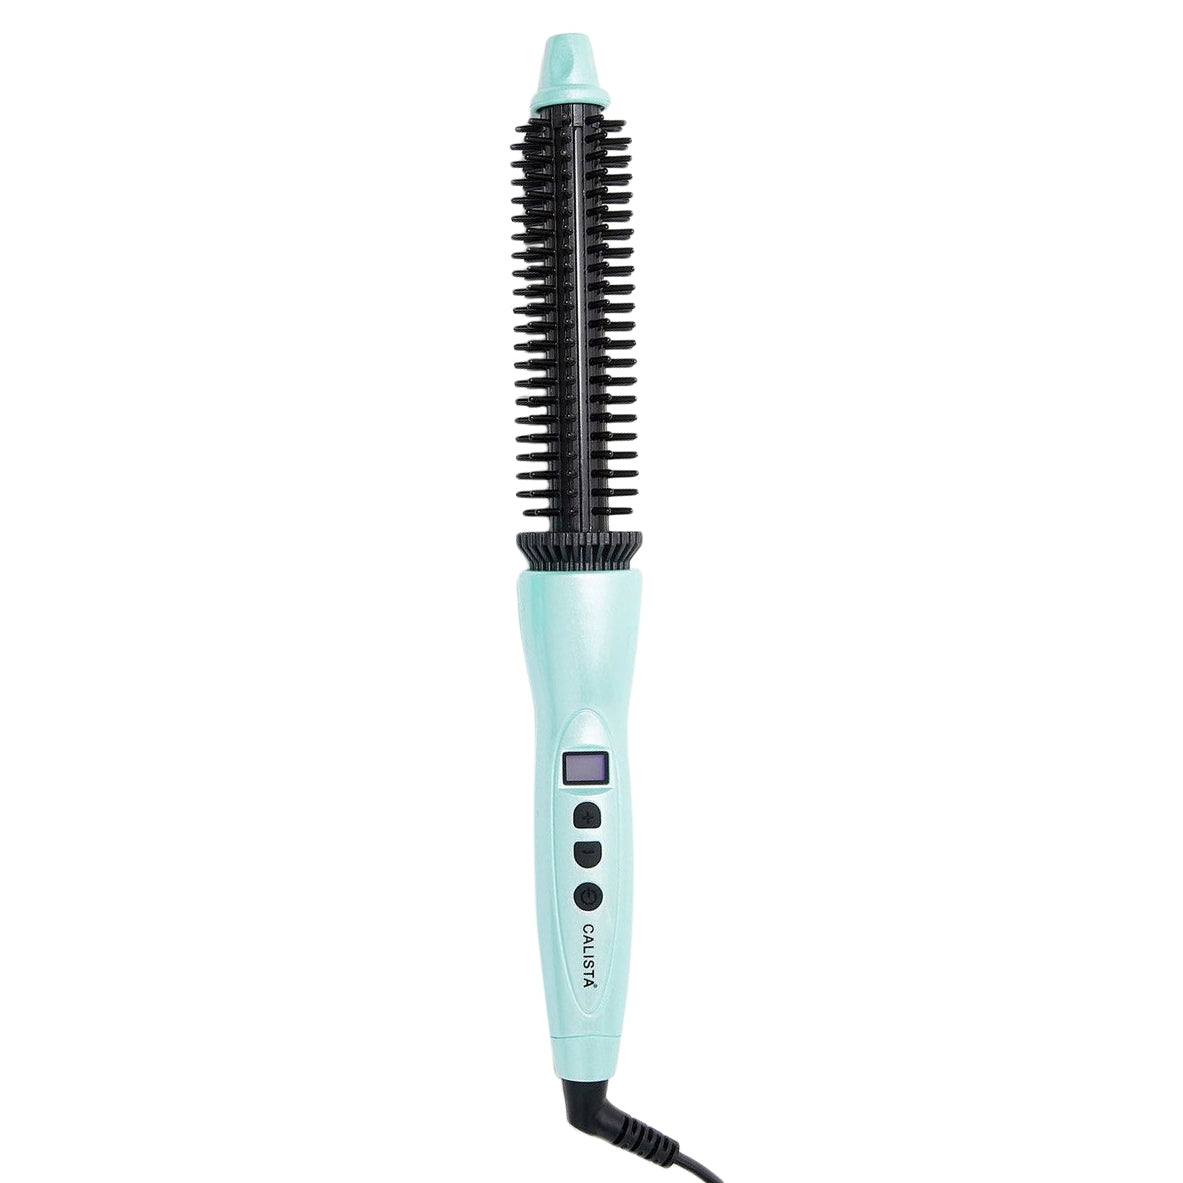 Calista Perfecter Pro Grip Heated Round Brush / Turquoise / 1/2 Inch